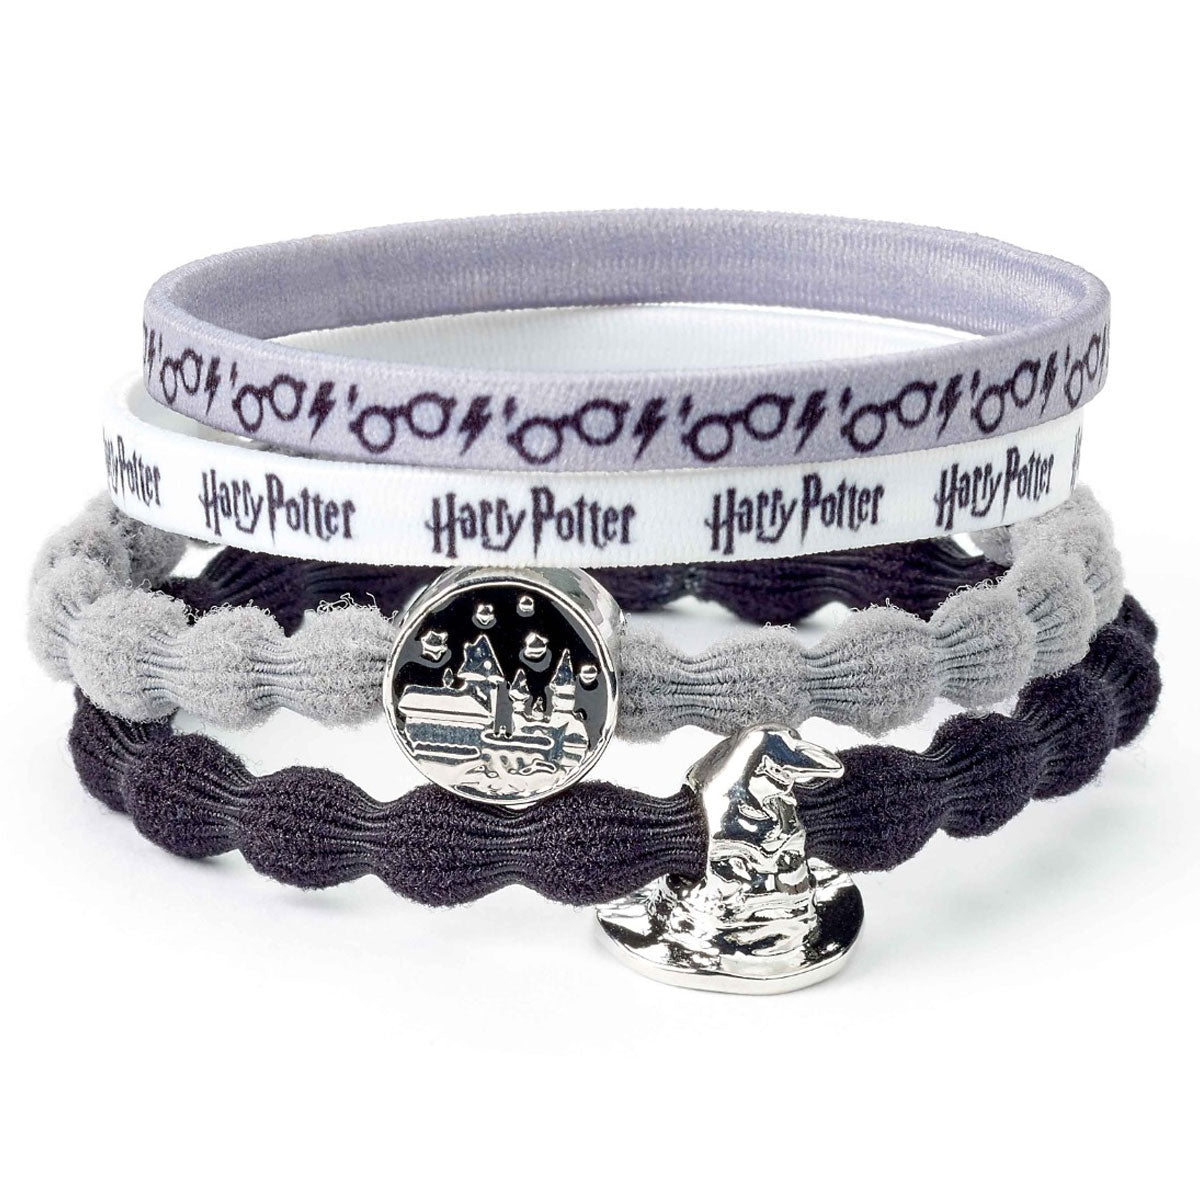 View Harry Potter Hair Bands Hogwarts information